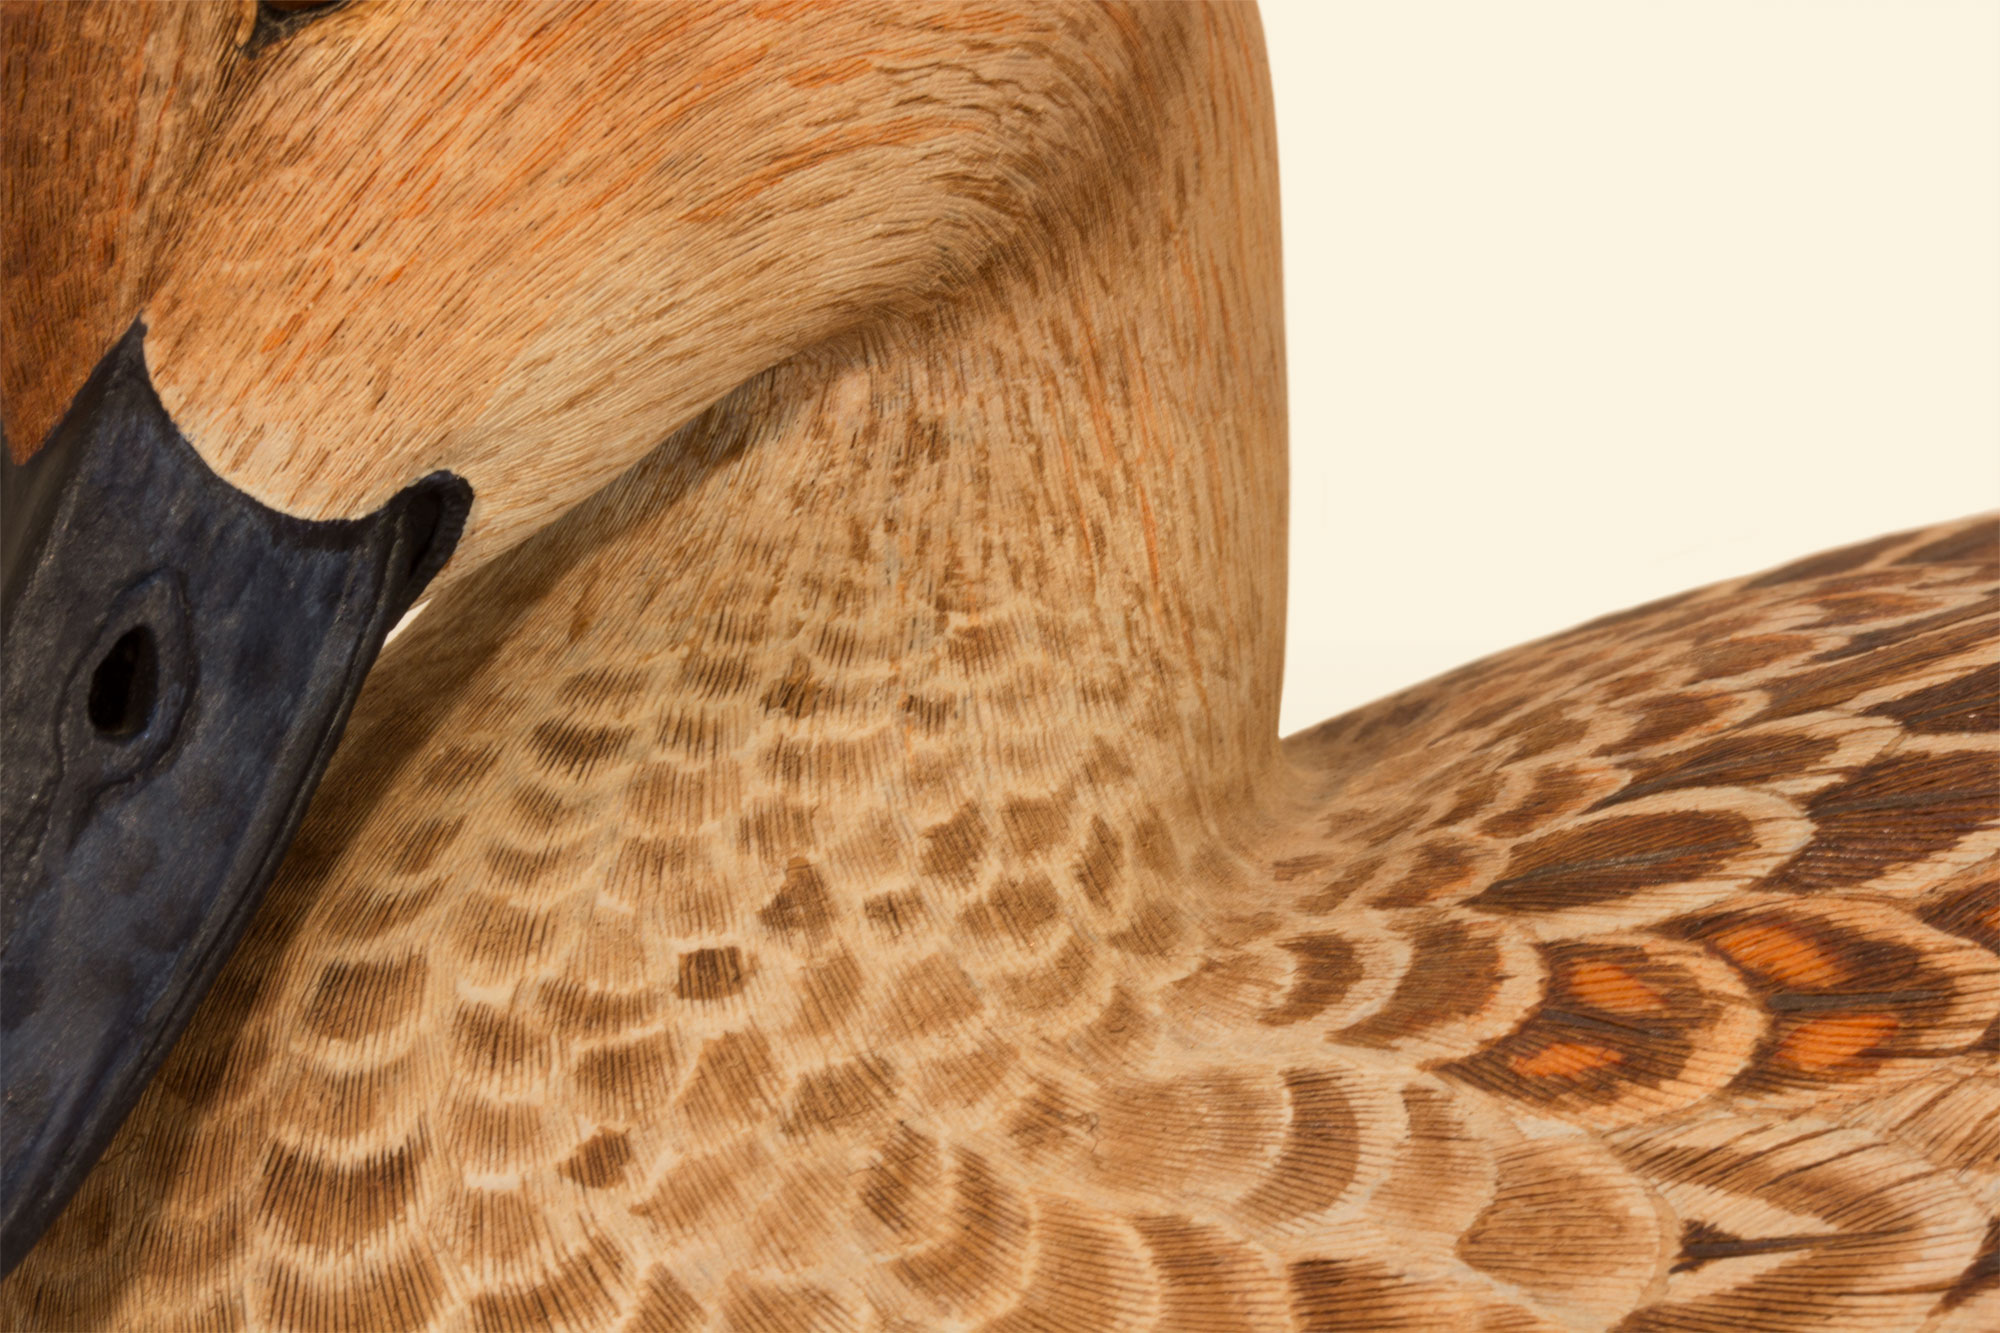 Pintail Hen 75% neck detail bird wood carving by Feathercarver David Patrick-Brown